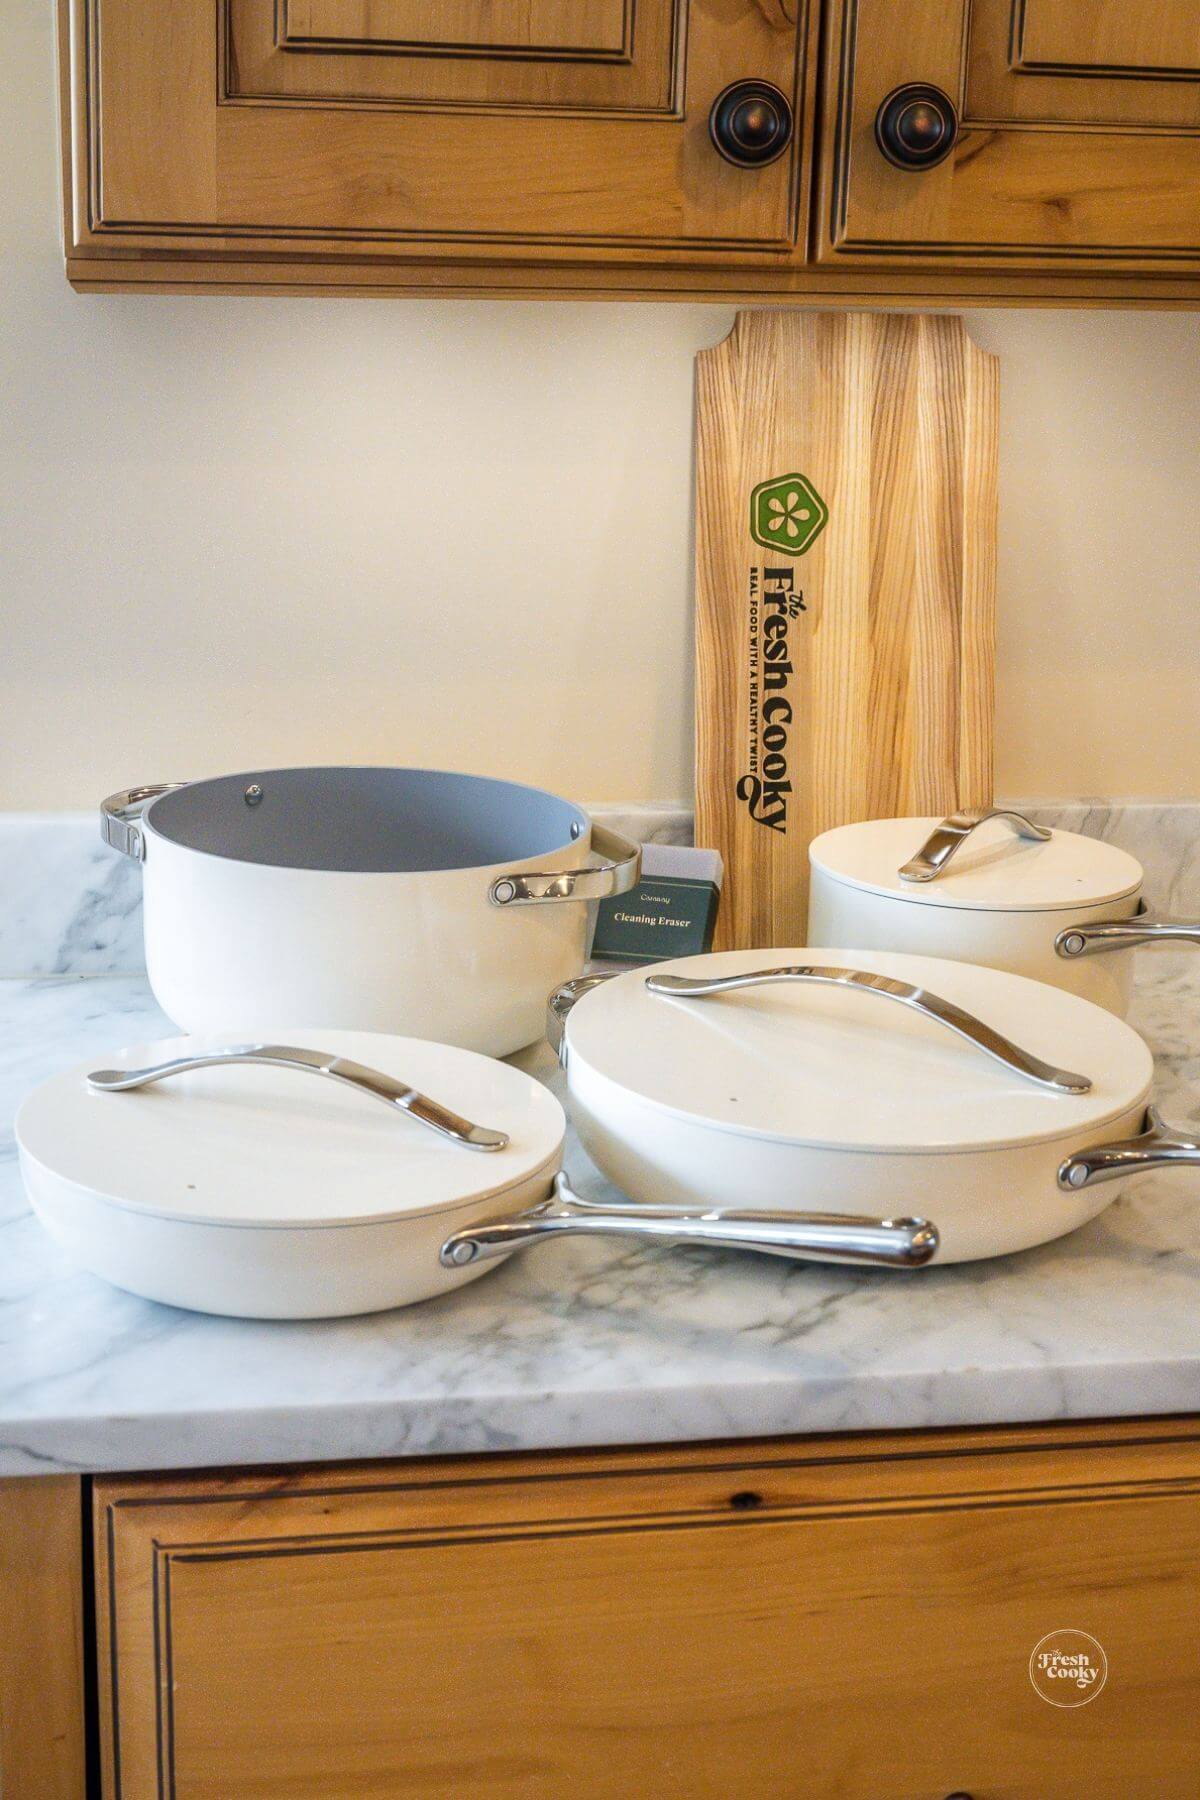 Caraway pots and pans with lids, trivets and cleaning sponge.